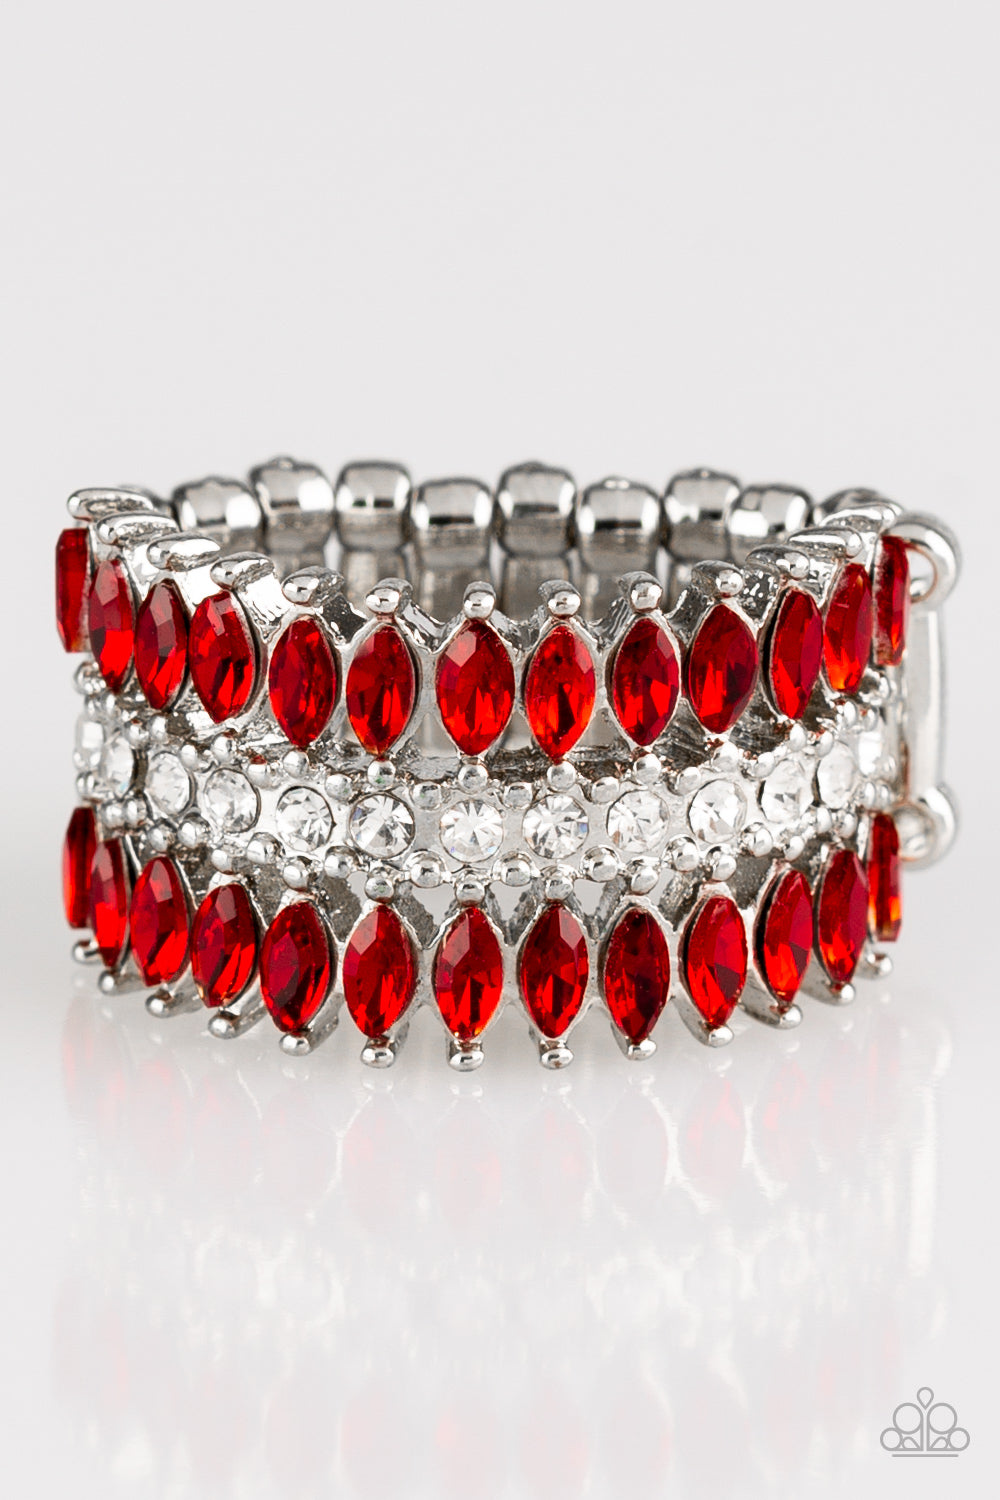 Featuring refined marquise cuts, glittery red rhinestones flare from a center of glassy white rhinestones, creating a regal band across the finger. Features a stretchy band for a flexible fit. Sold as one individual ring.